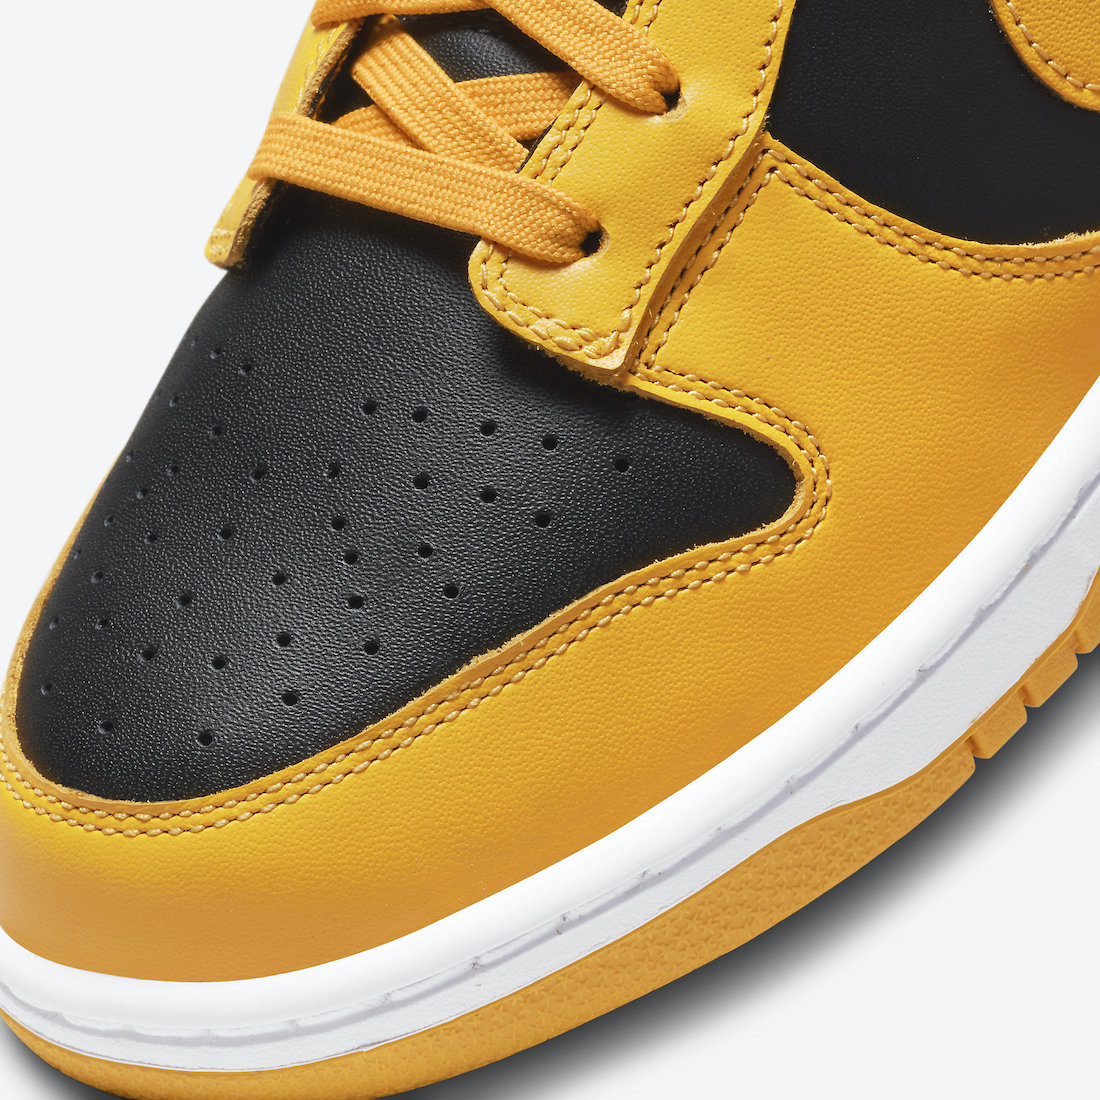 Nike-Dunk-Low-Goldenrod-DD1391-004-Release-Date-Price-6